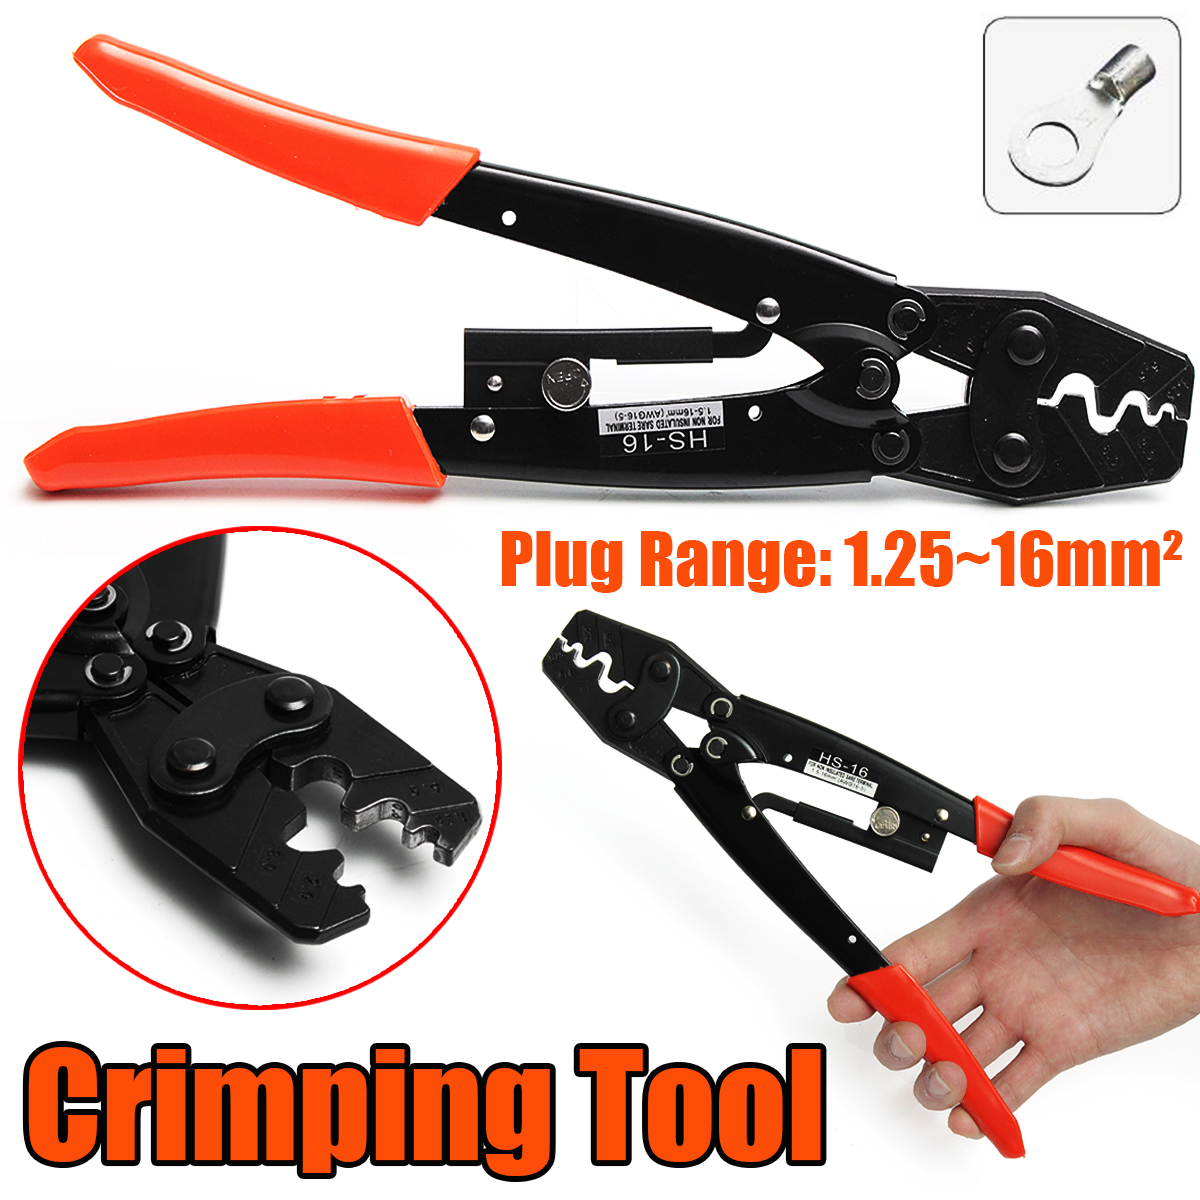 50-Amp-125-16-mm2-Plug-Cable-Crimping-Tool-For-Wire-Crimper-Terminals-Links-1131124-1